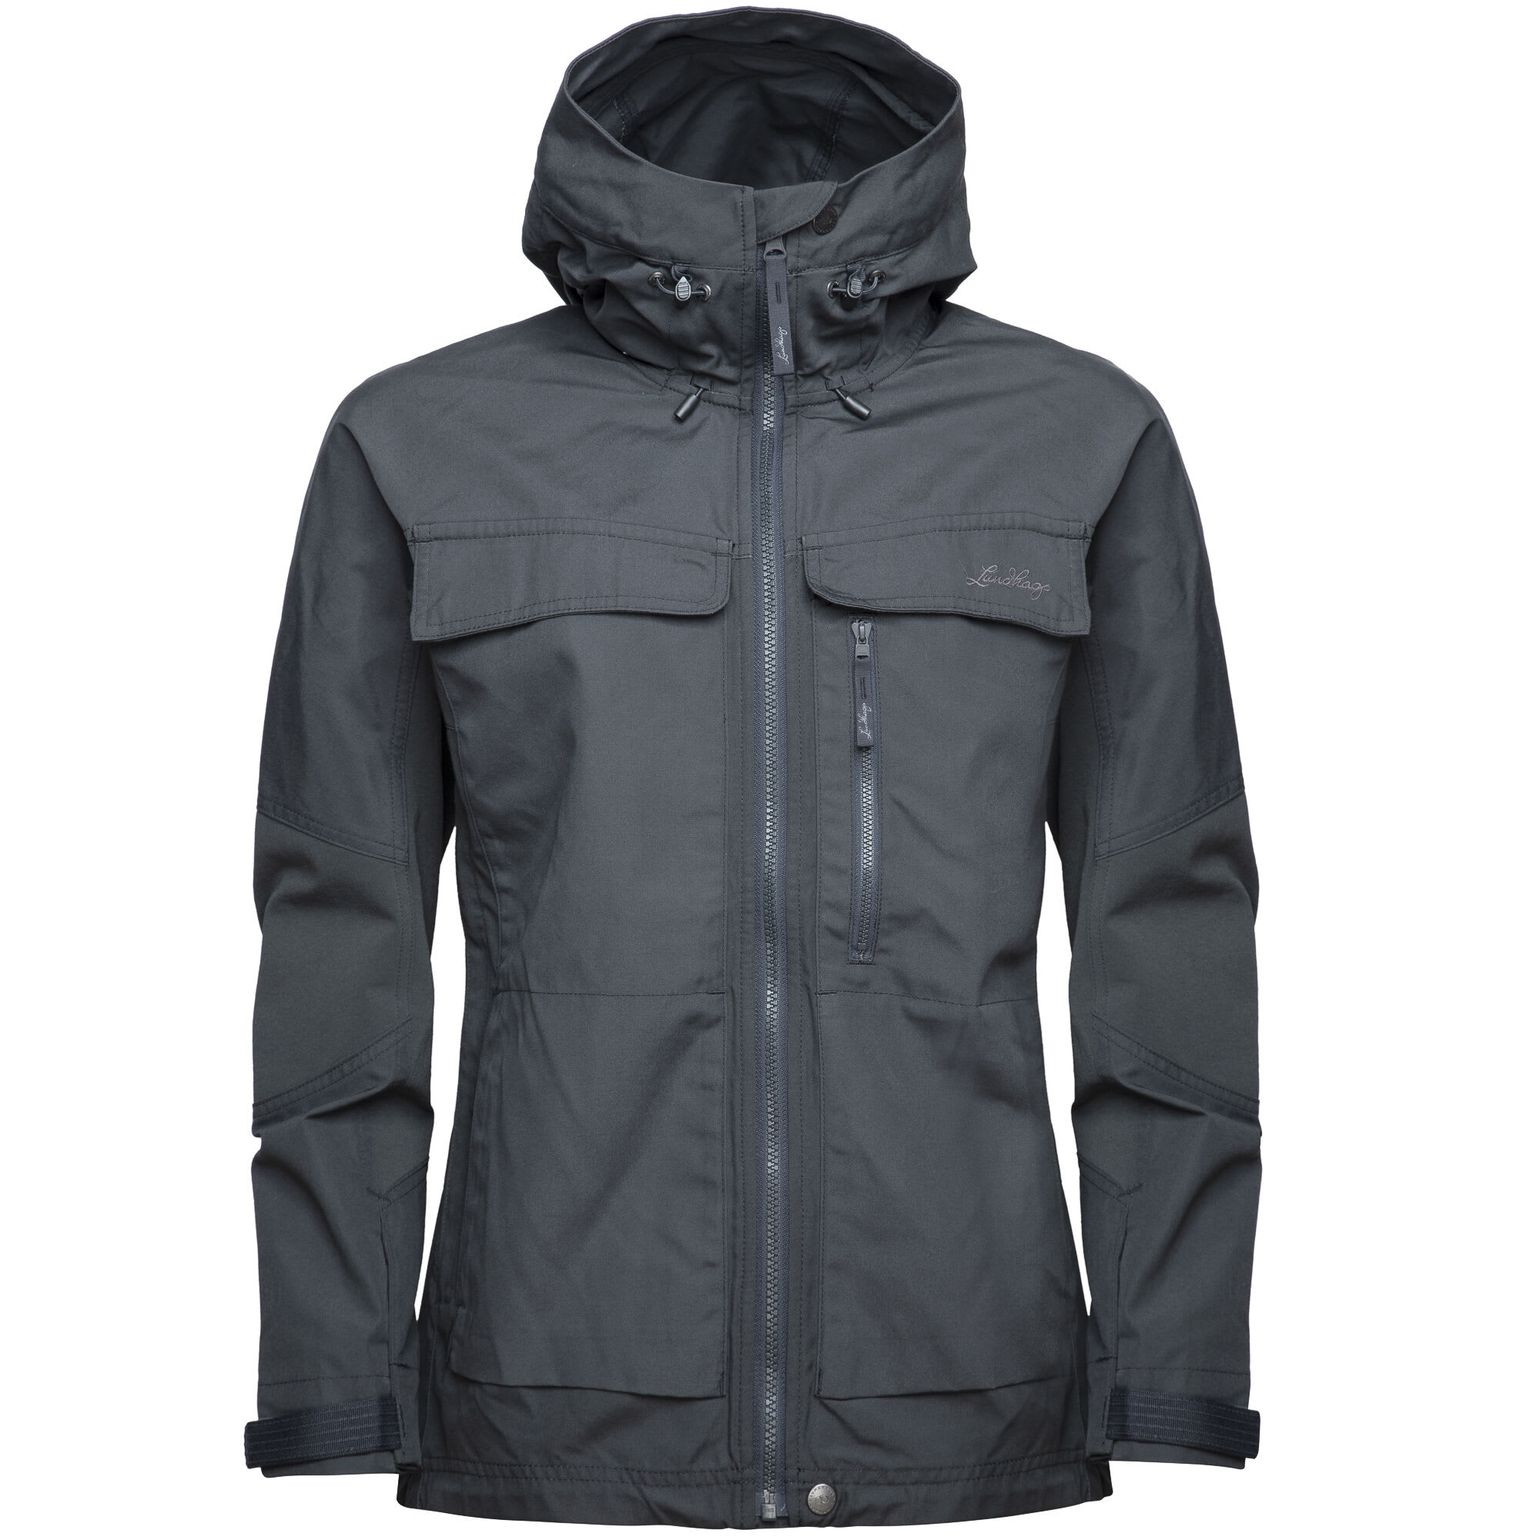 Lundhags Women's Authentic Jacket Charcoal